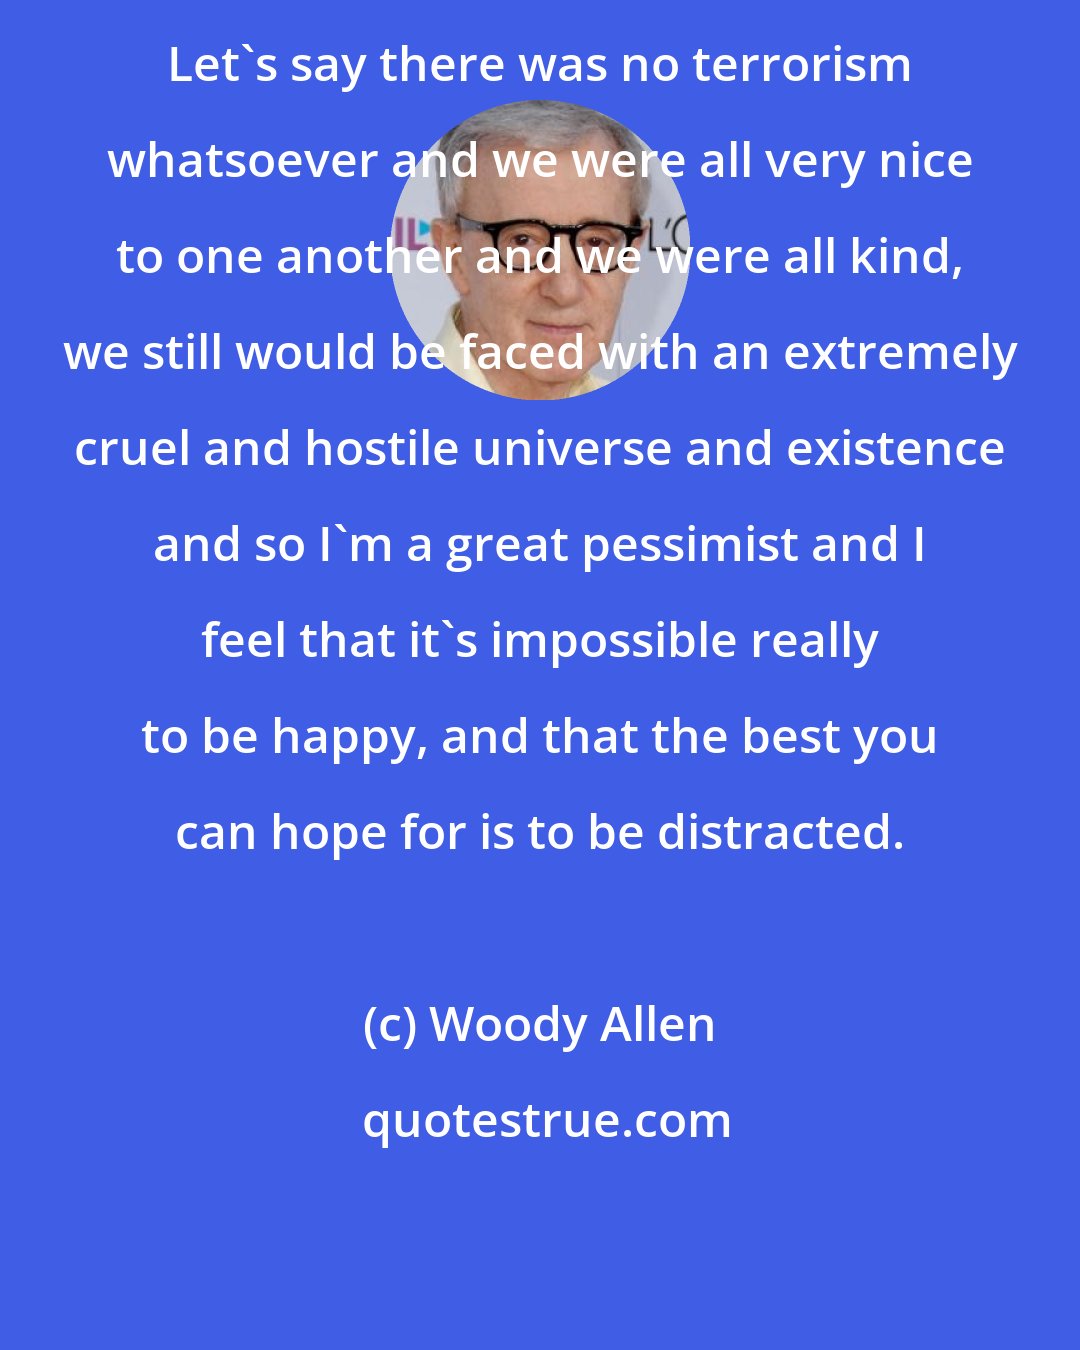 Woody Allen: Let's say there was no terrorism whatsoever and we were all very nice to one another and we were all kind, we still would be faced with an extremely cruel and hostile universe and existence and so I'm a great pessimist and I feel that it's impossible really to be happy, and that the best you can hope for is to be distracted.